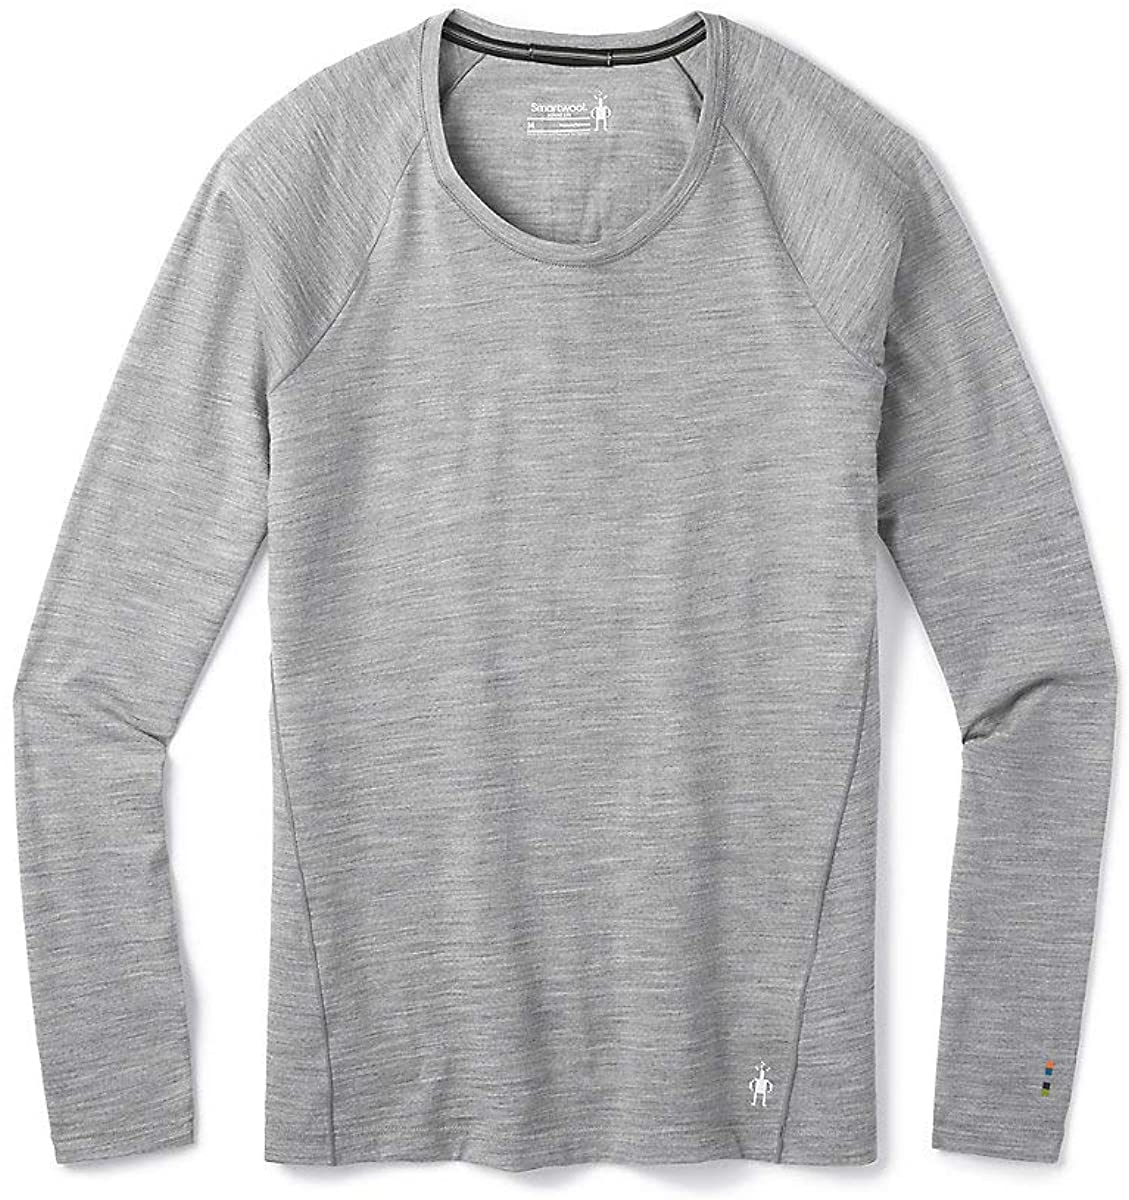 Women's Smartwool Merino 150 Base Layer Long Sleeve in Light Gray Heather from the side view